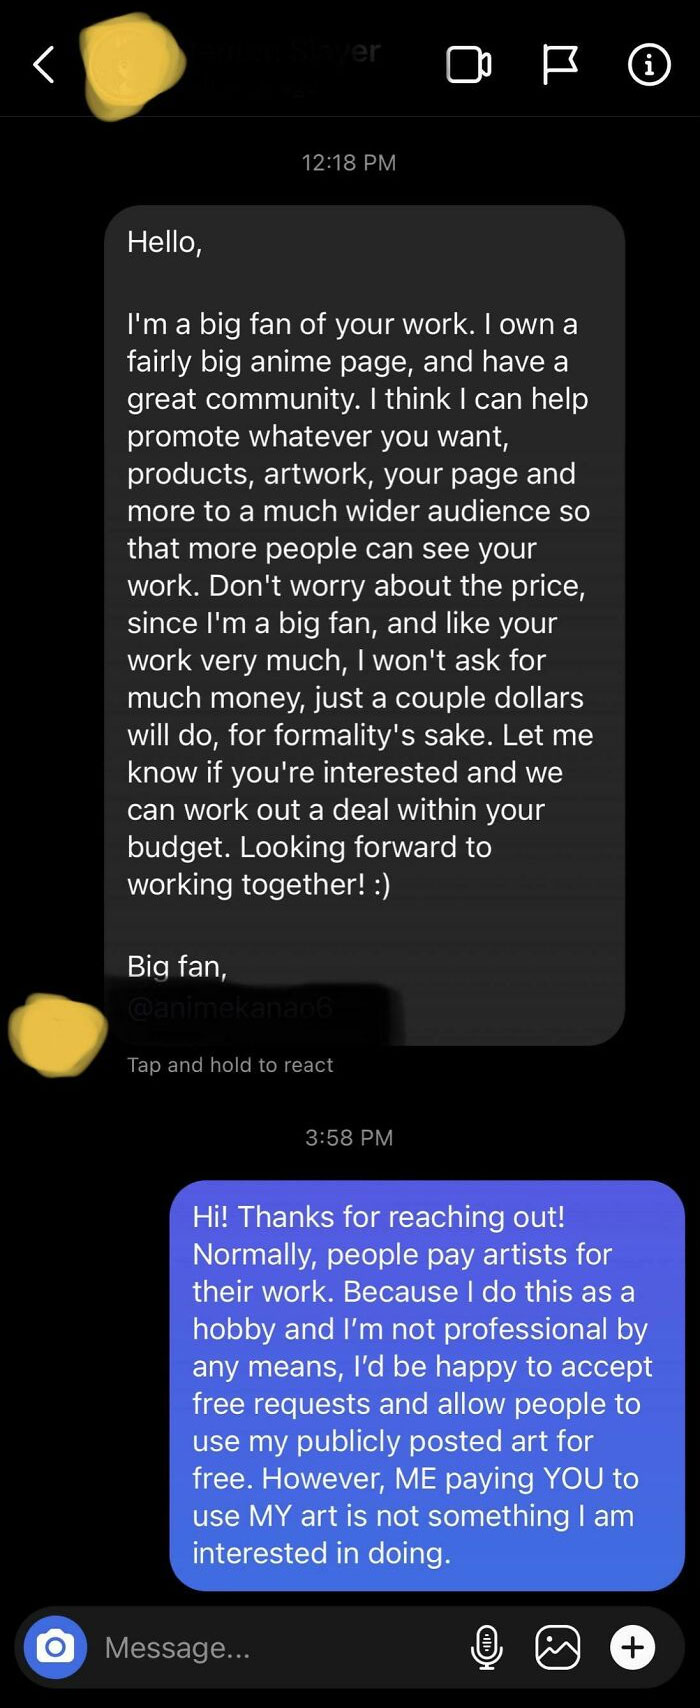 Getting Free Art In Exchange For “Exposure” Isn’t Enough Anymore. You Have To Get Artists To Pay You To Get “Exposure” Now